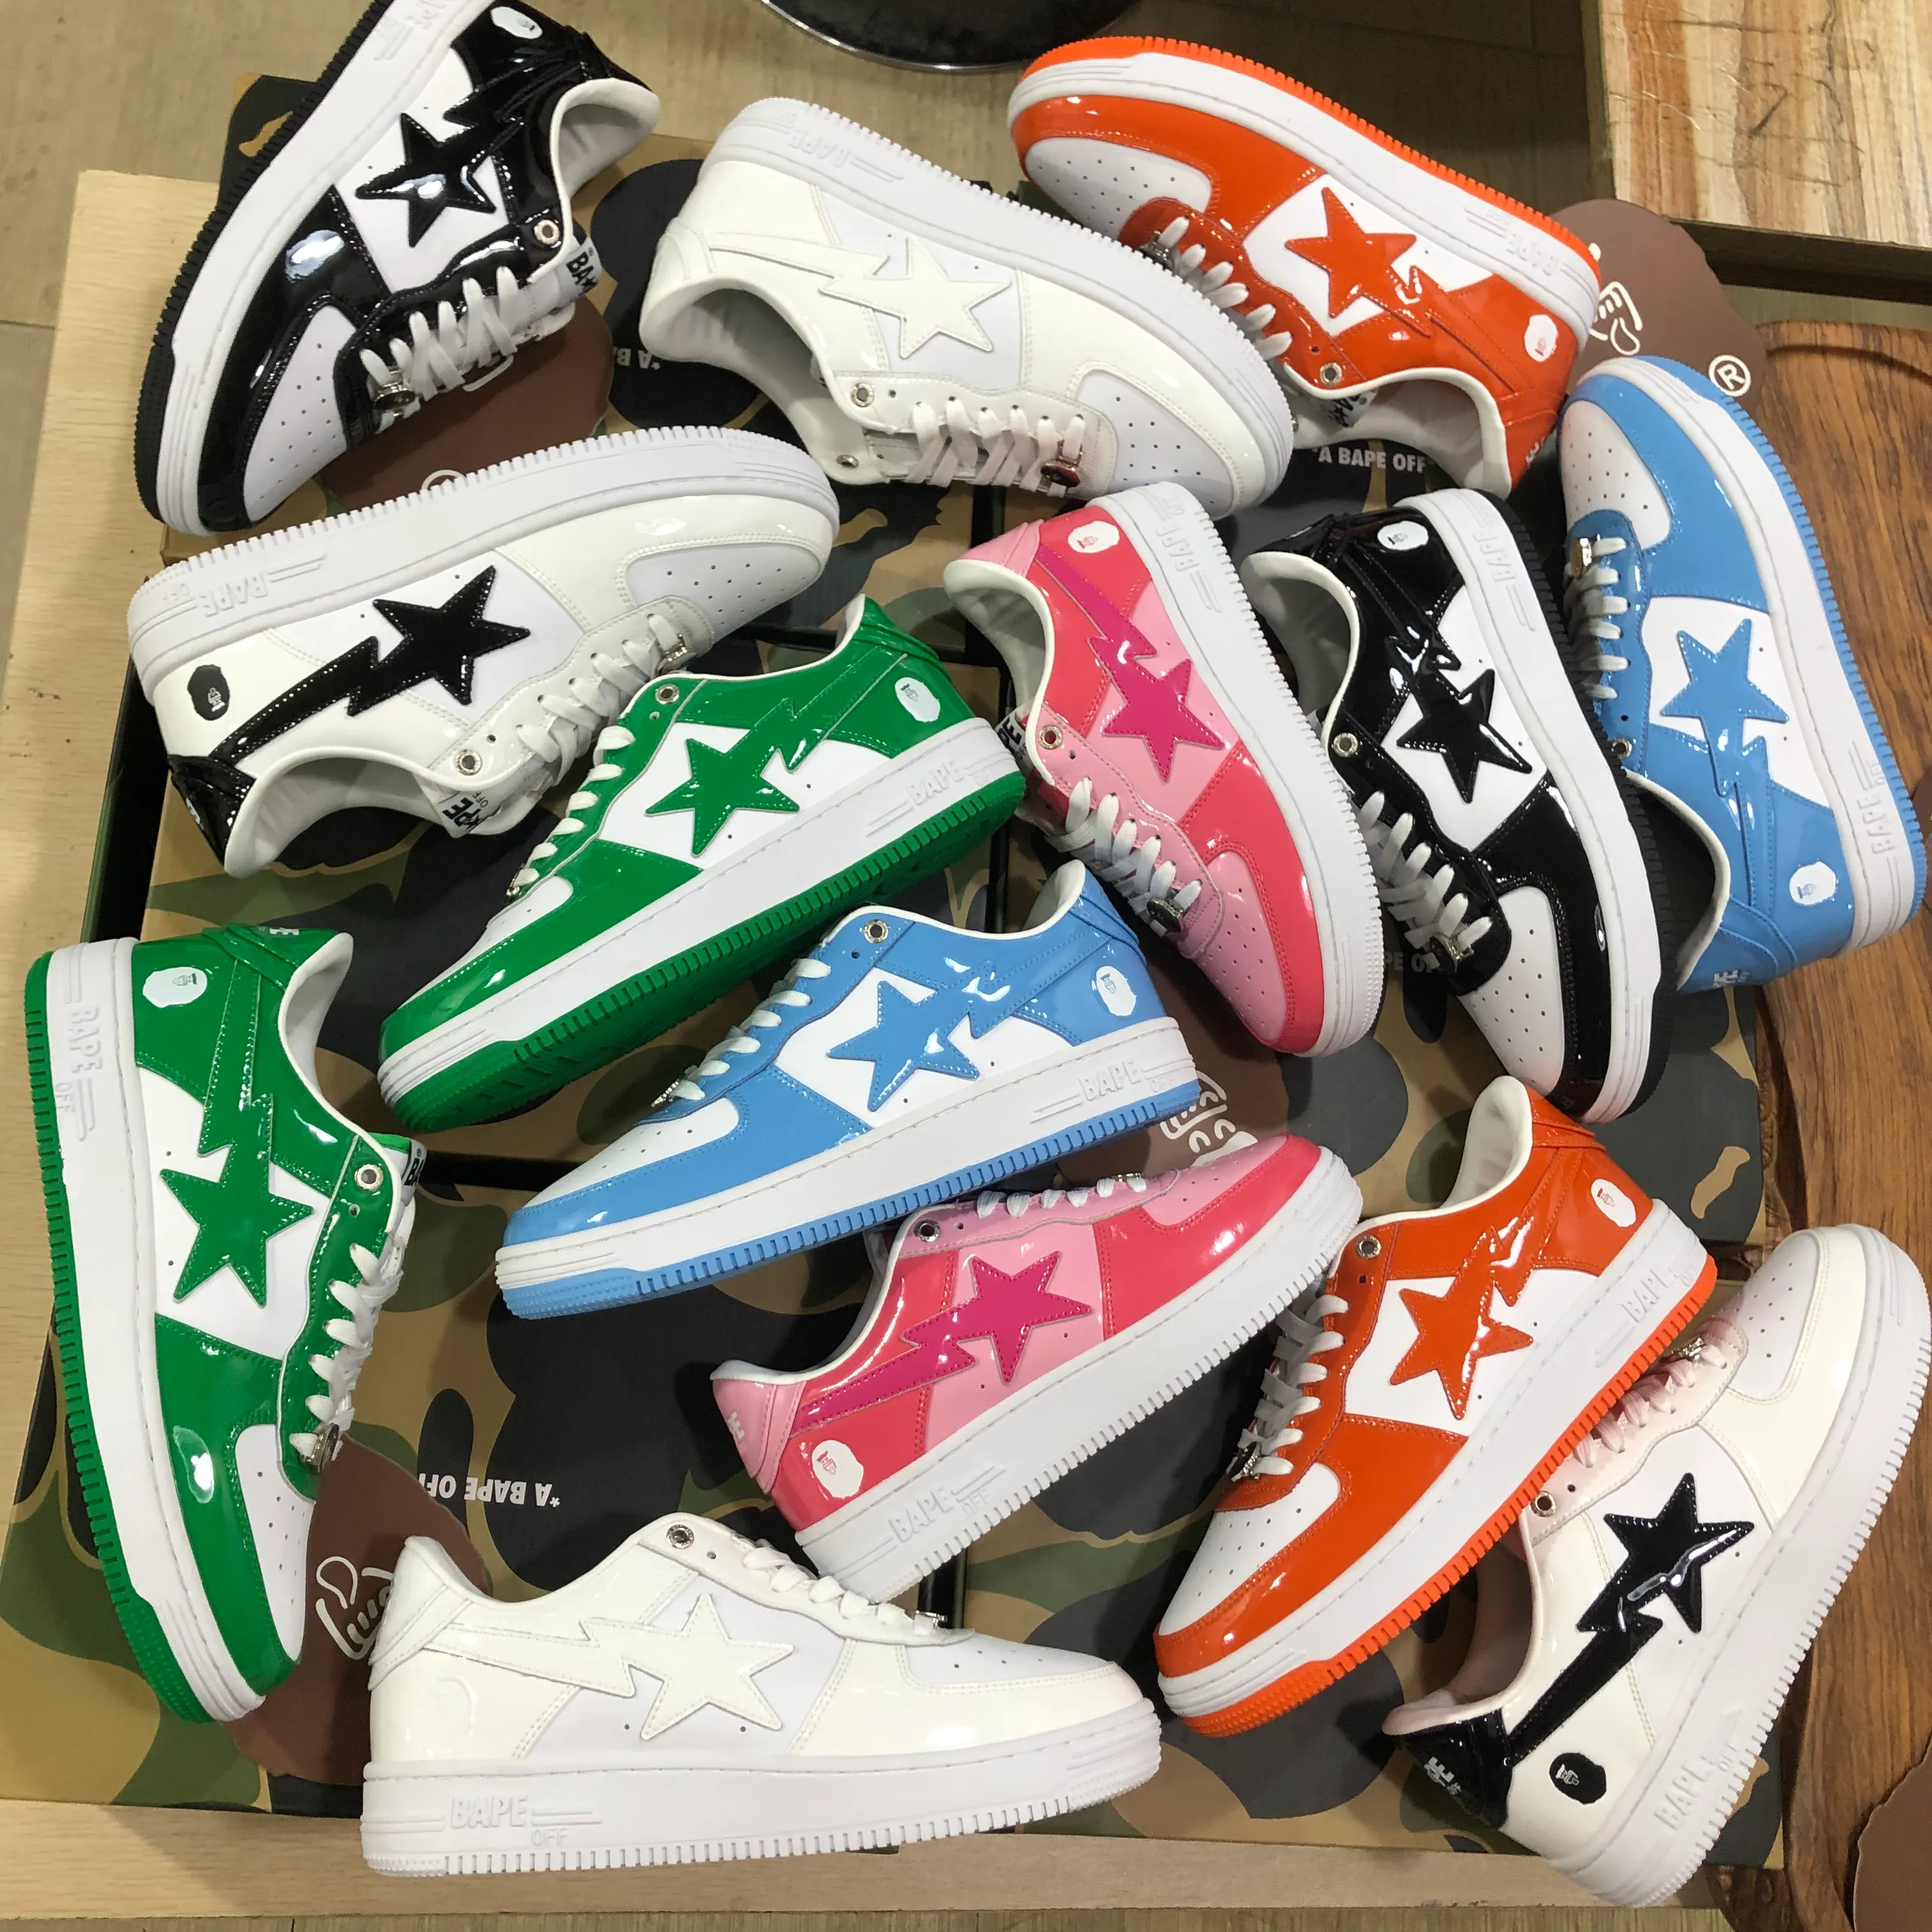 Bapesta Bapestas Baped off Casual Shoes Sk8 Low Men Women Black White Pastel Green Blue Suede Pink Mens Womens Trainers Outdoor Sports Sneakers Walking Jogging